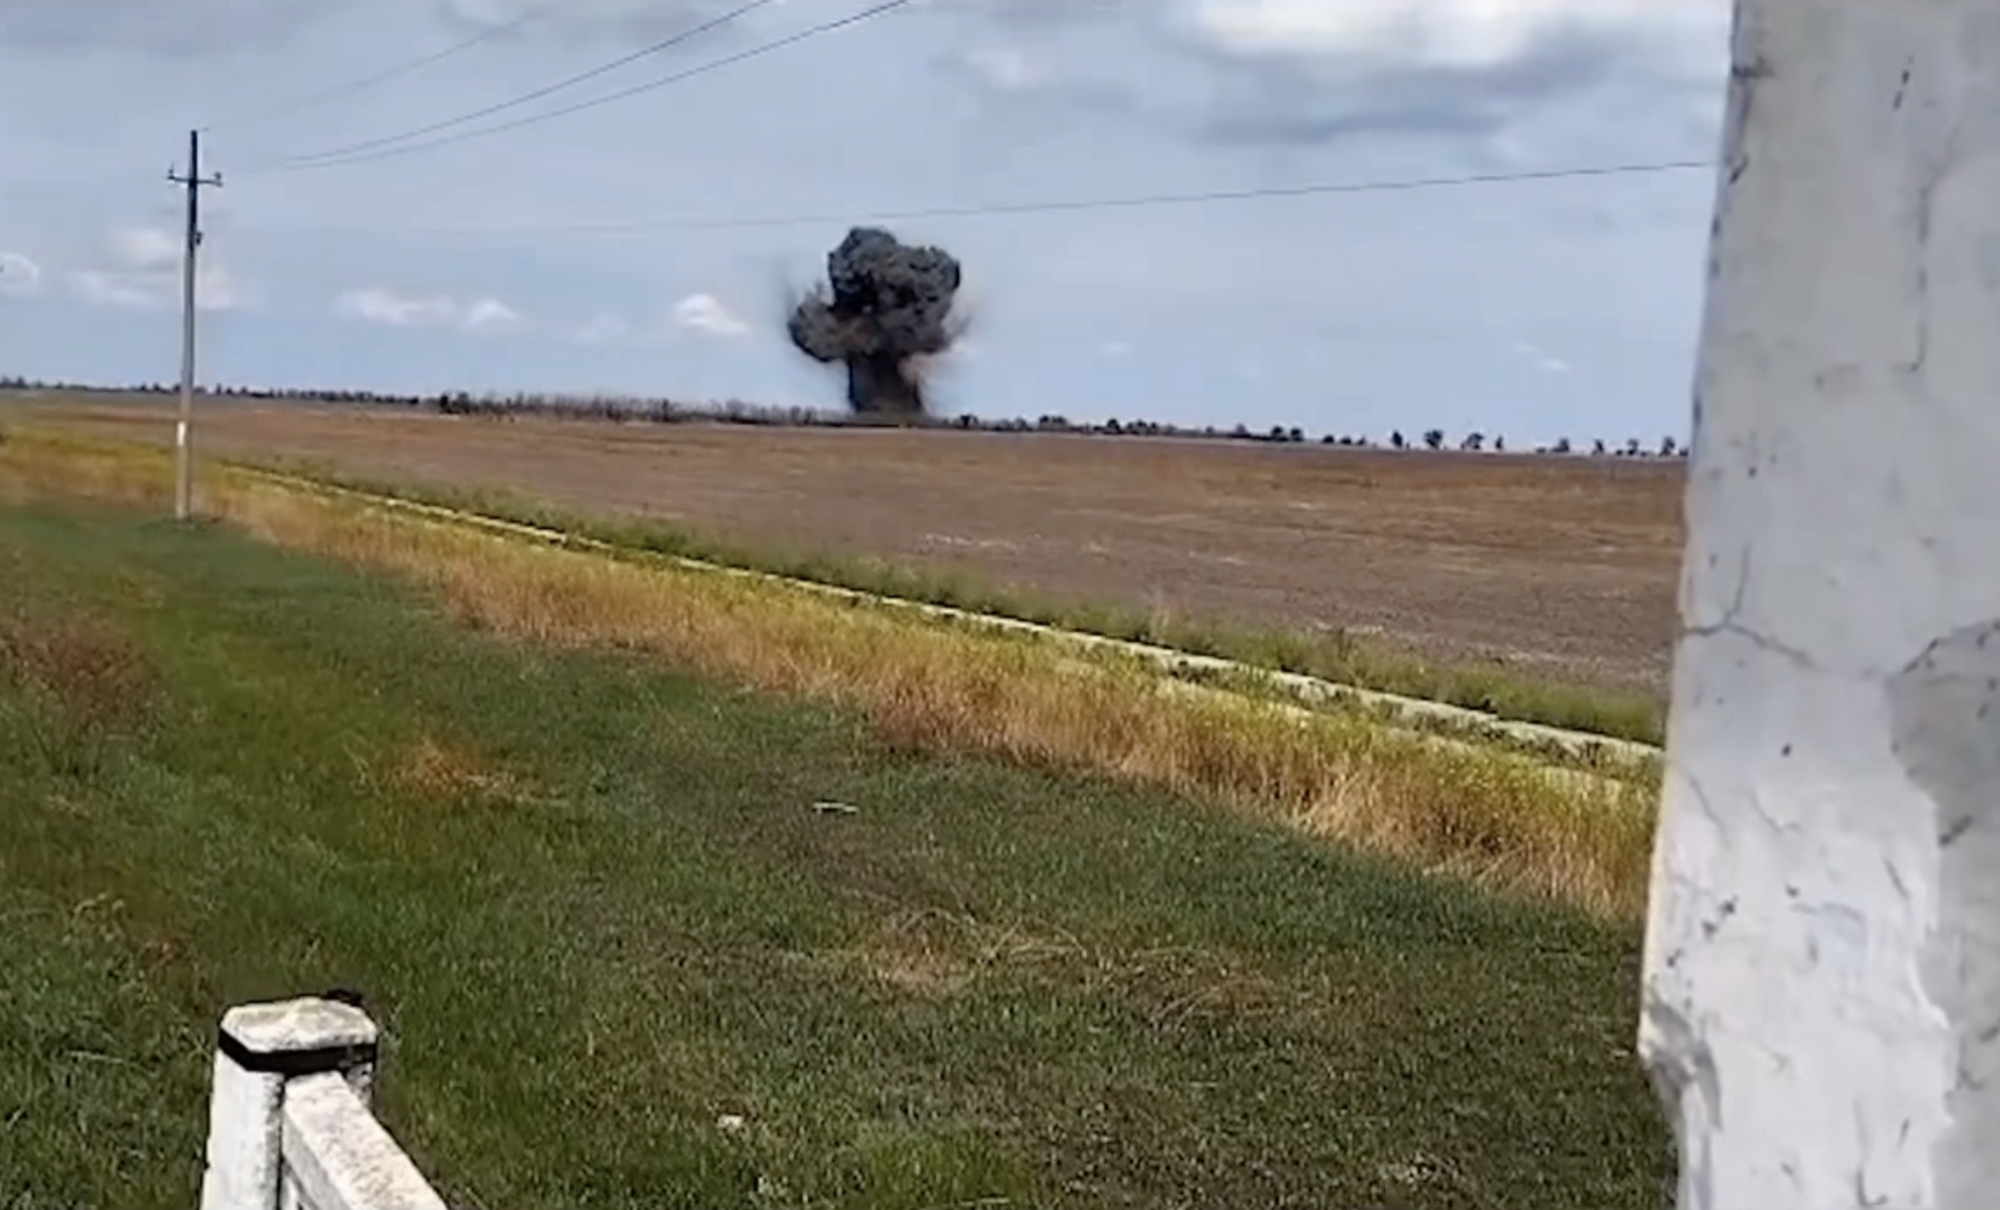 Explosives experts detect and neutralise Russian Tochka-U missile in Kherson region. Video